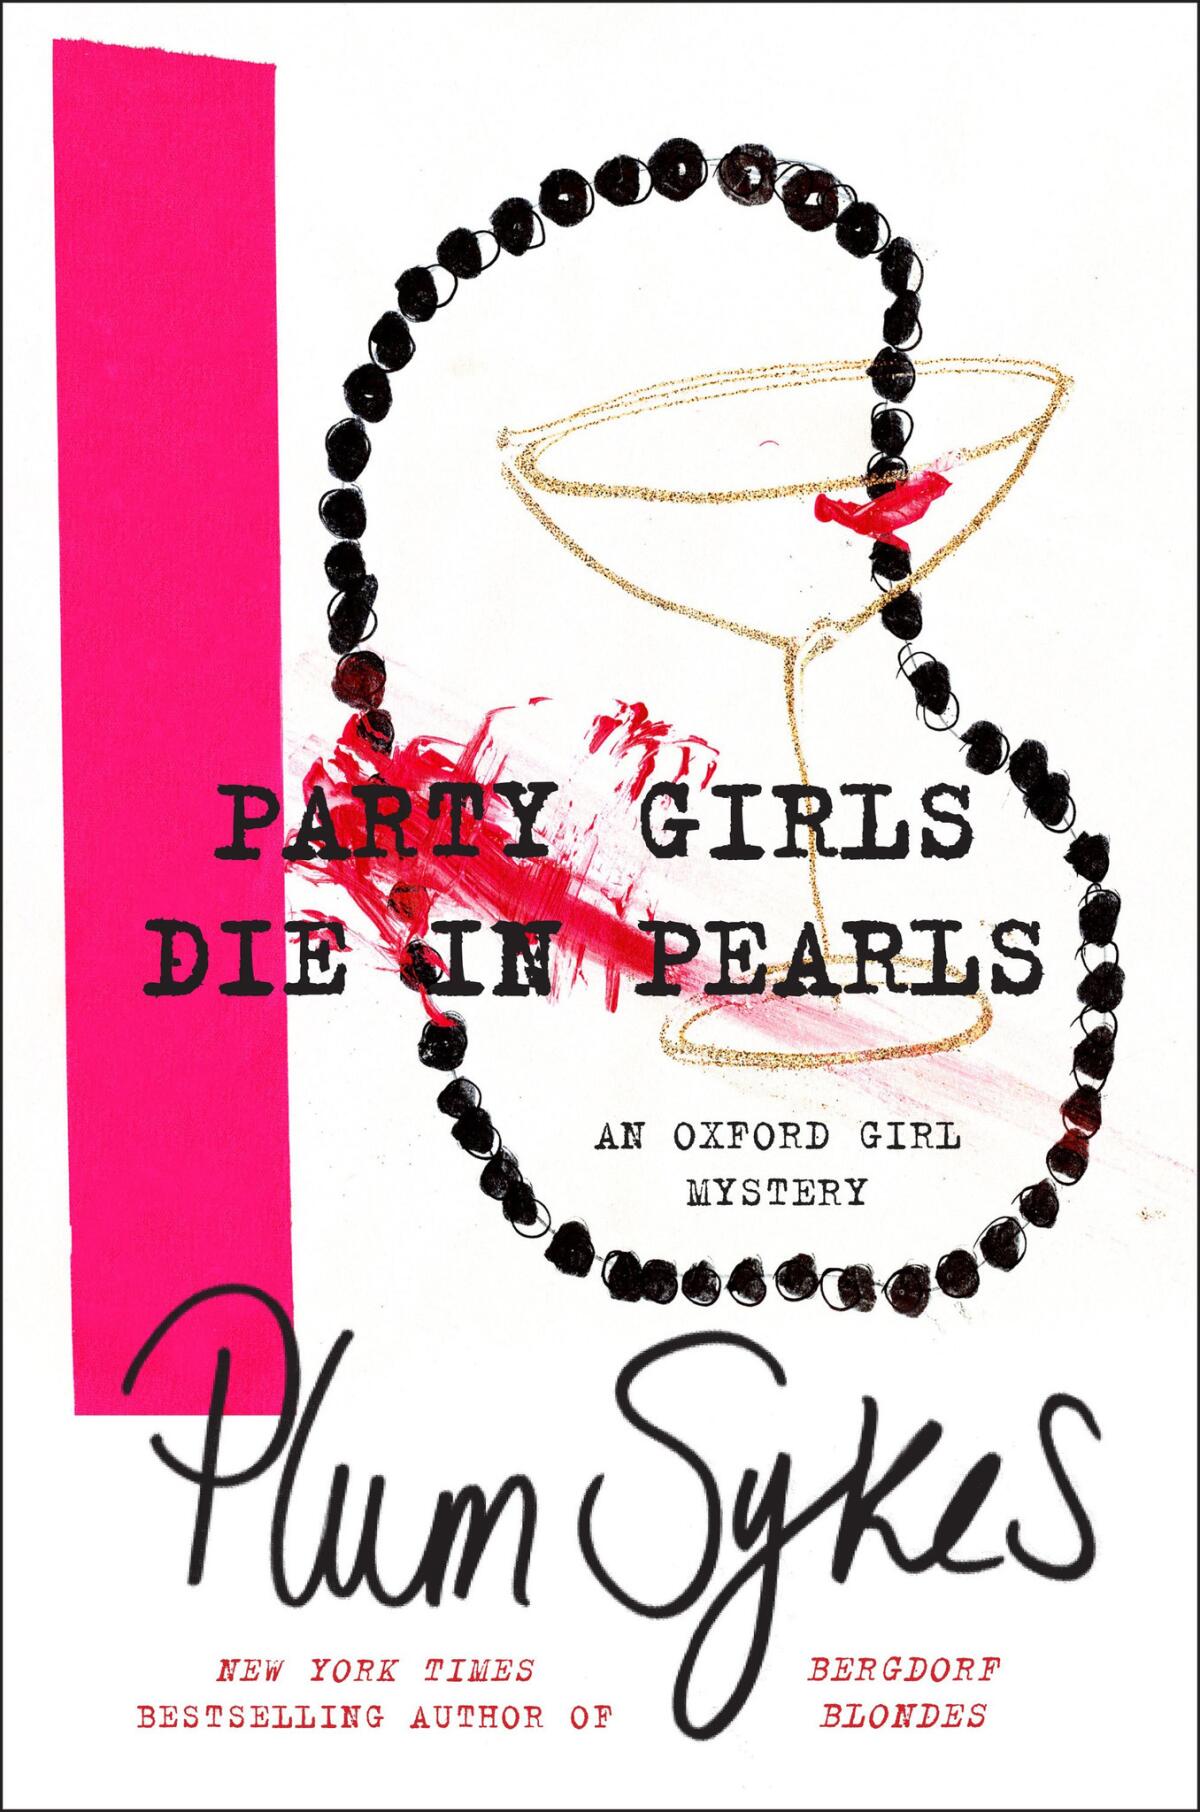 The cover of Plum Sykes' latest novel, "Party Girls Die in Pearls," features a cover illustration by Donald Robertson.